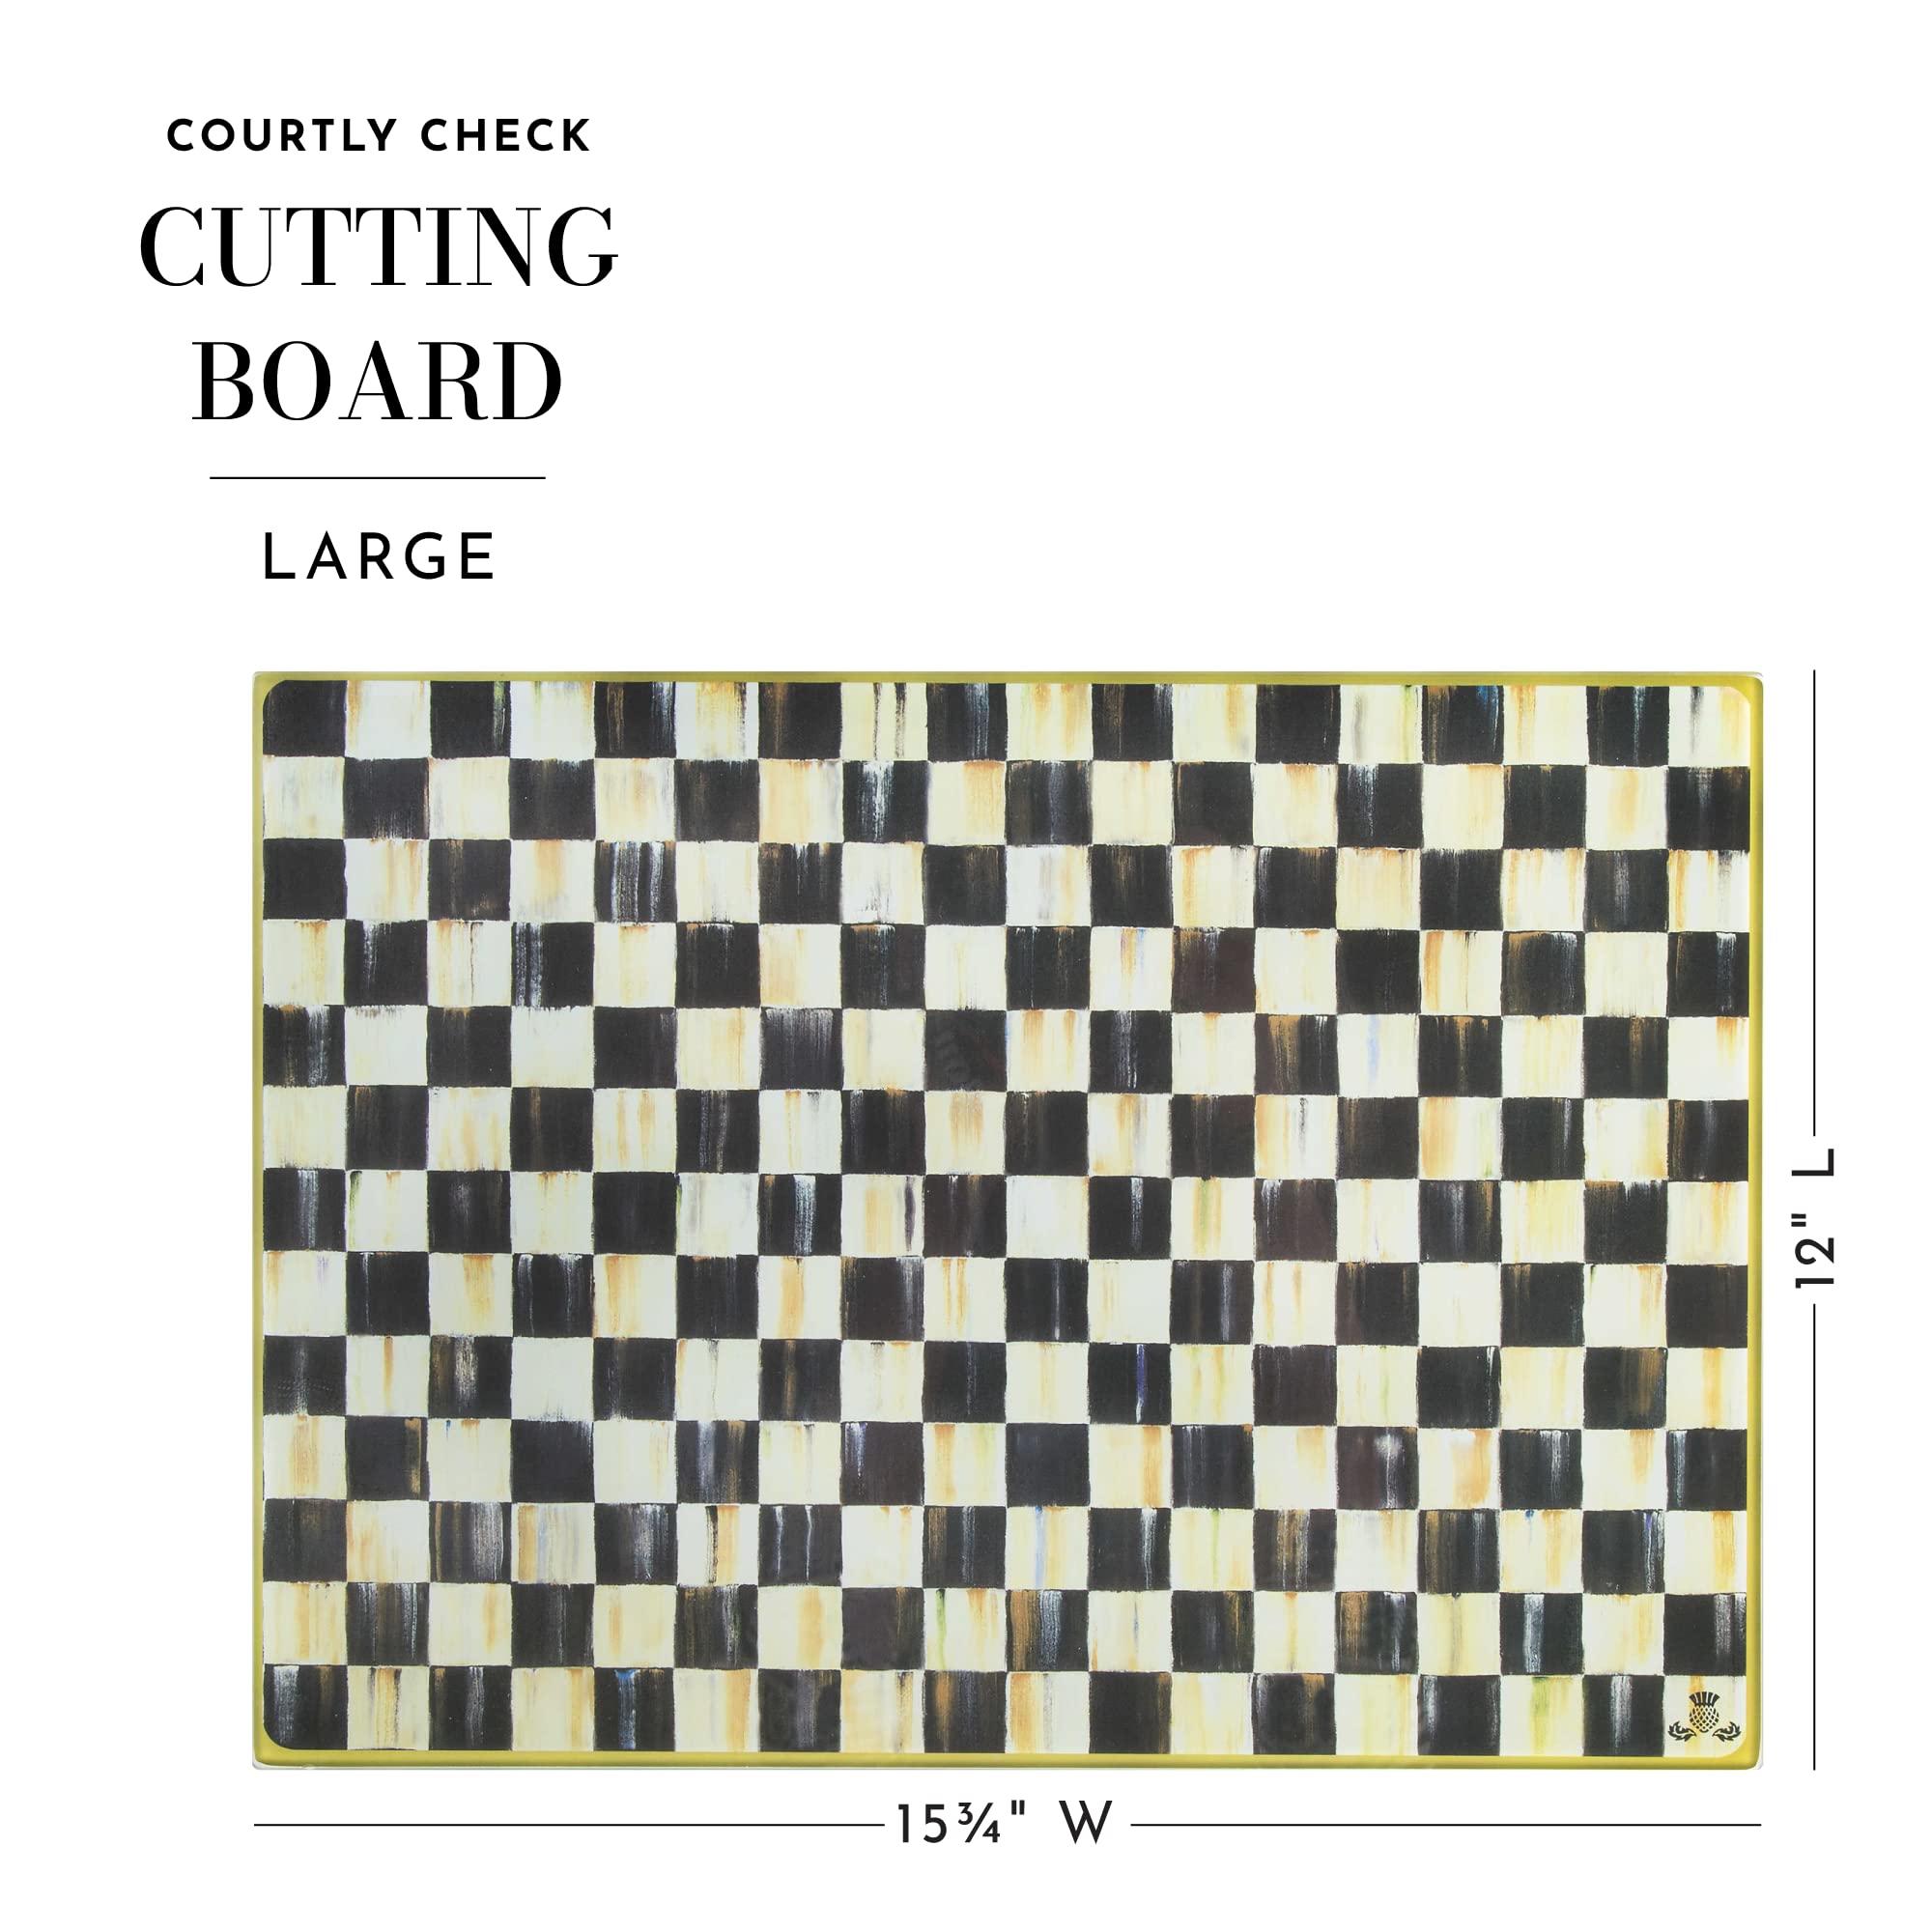 MacKenzie-Childs Courtly Check Large Cutting Board, Tempered-Glass Cutting Board for Kitchen Use